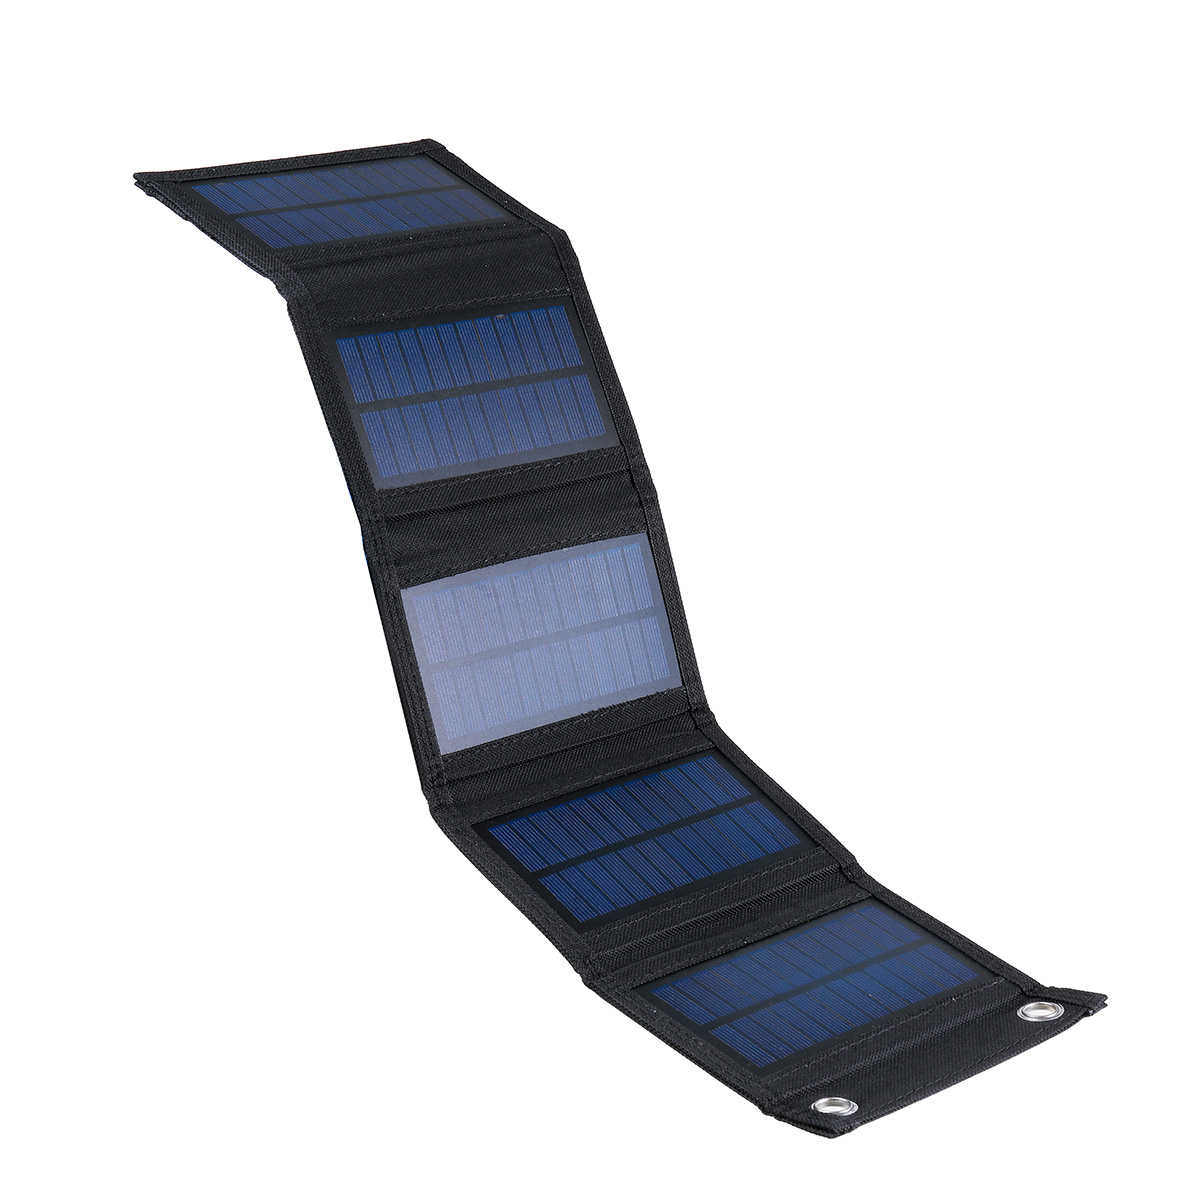 45W6W75W-Solar-Panel-Charger-USB-Output-5V-Waterproof-Backpack-Mobile-Power-Bank-1916087-6